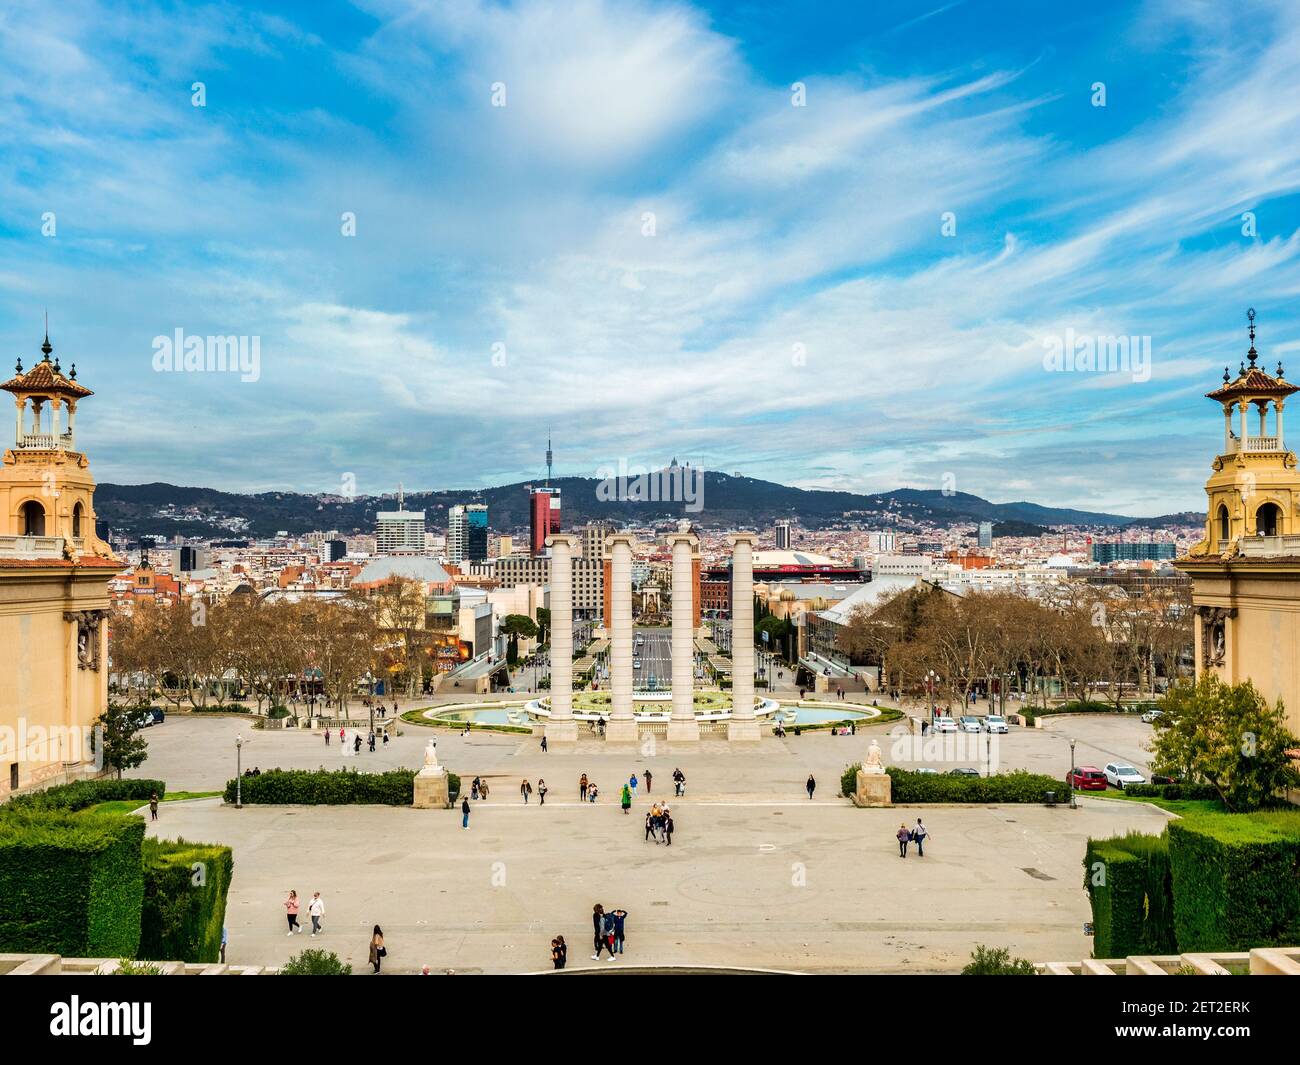 4 March 2020: Barcelona, Spain - View of Barcelona from the National Art Museum of Catalonia towards Plaça d'Espanya and Mount Tibidabo.. Stock Photo